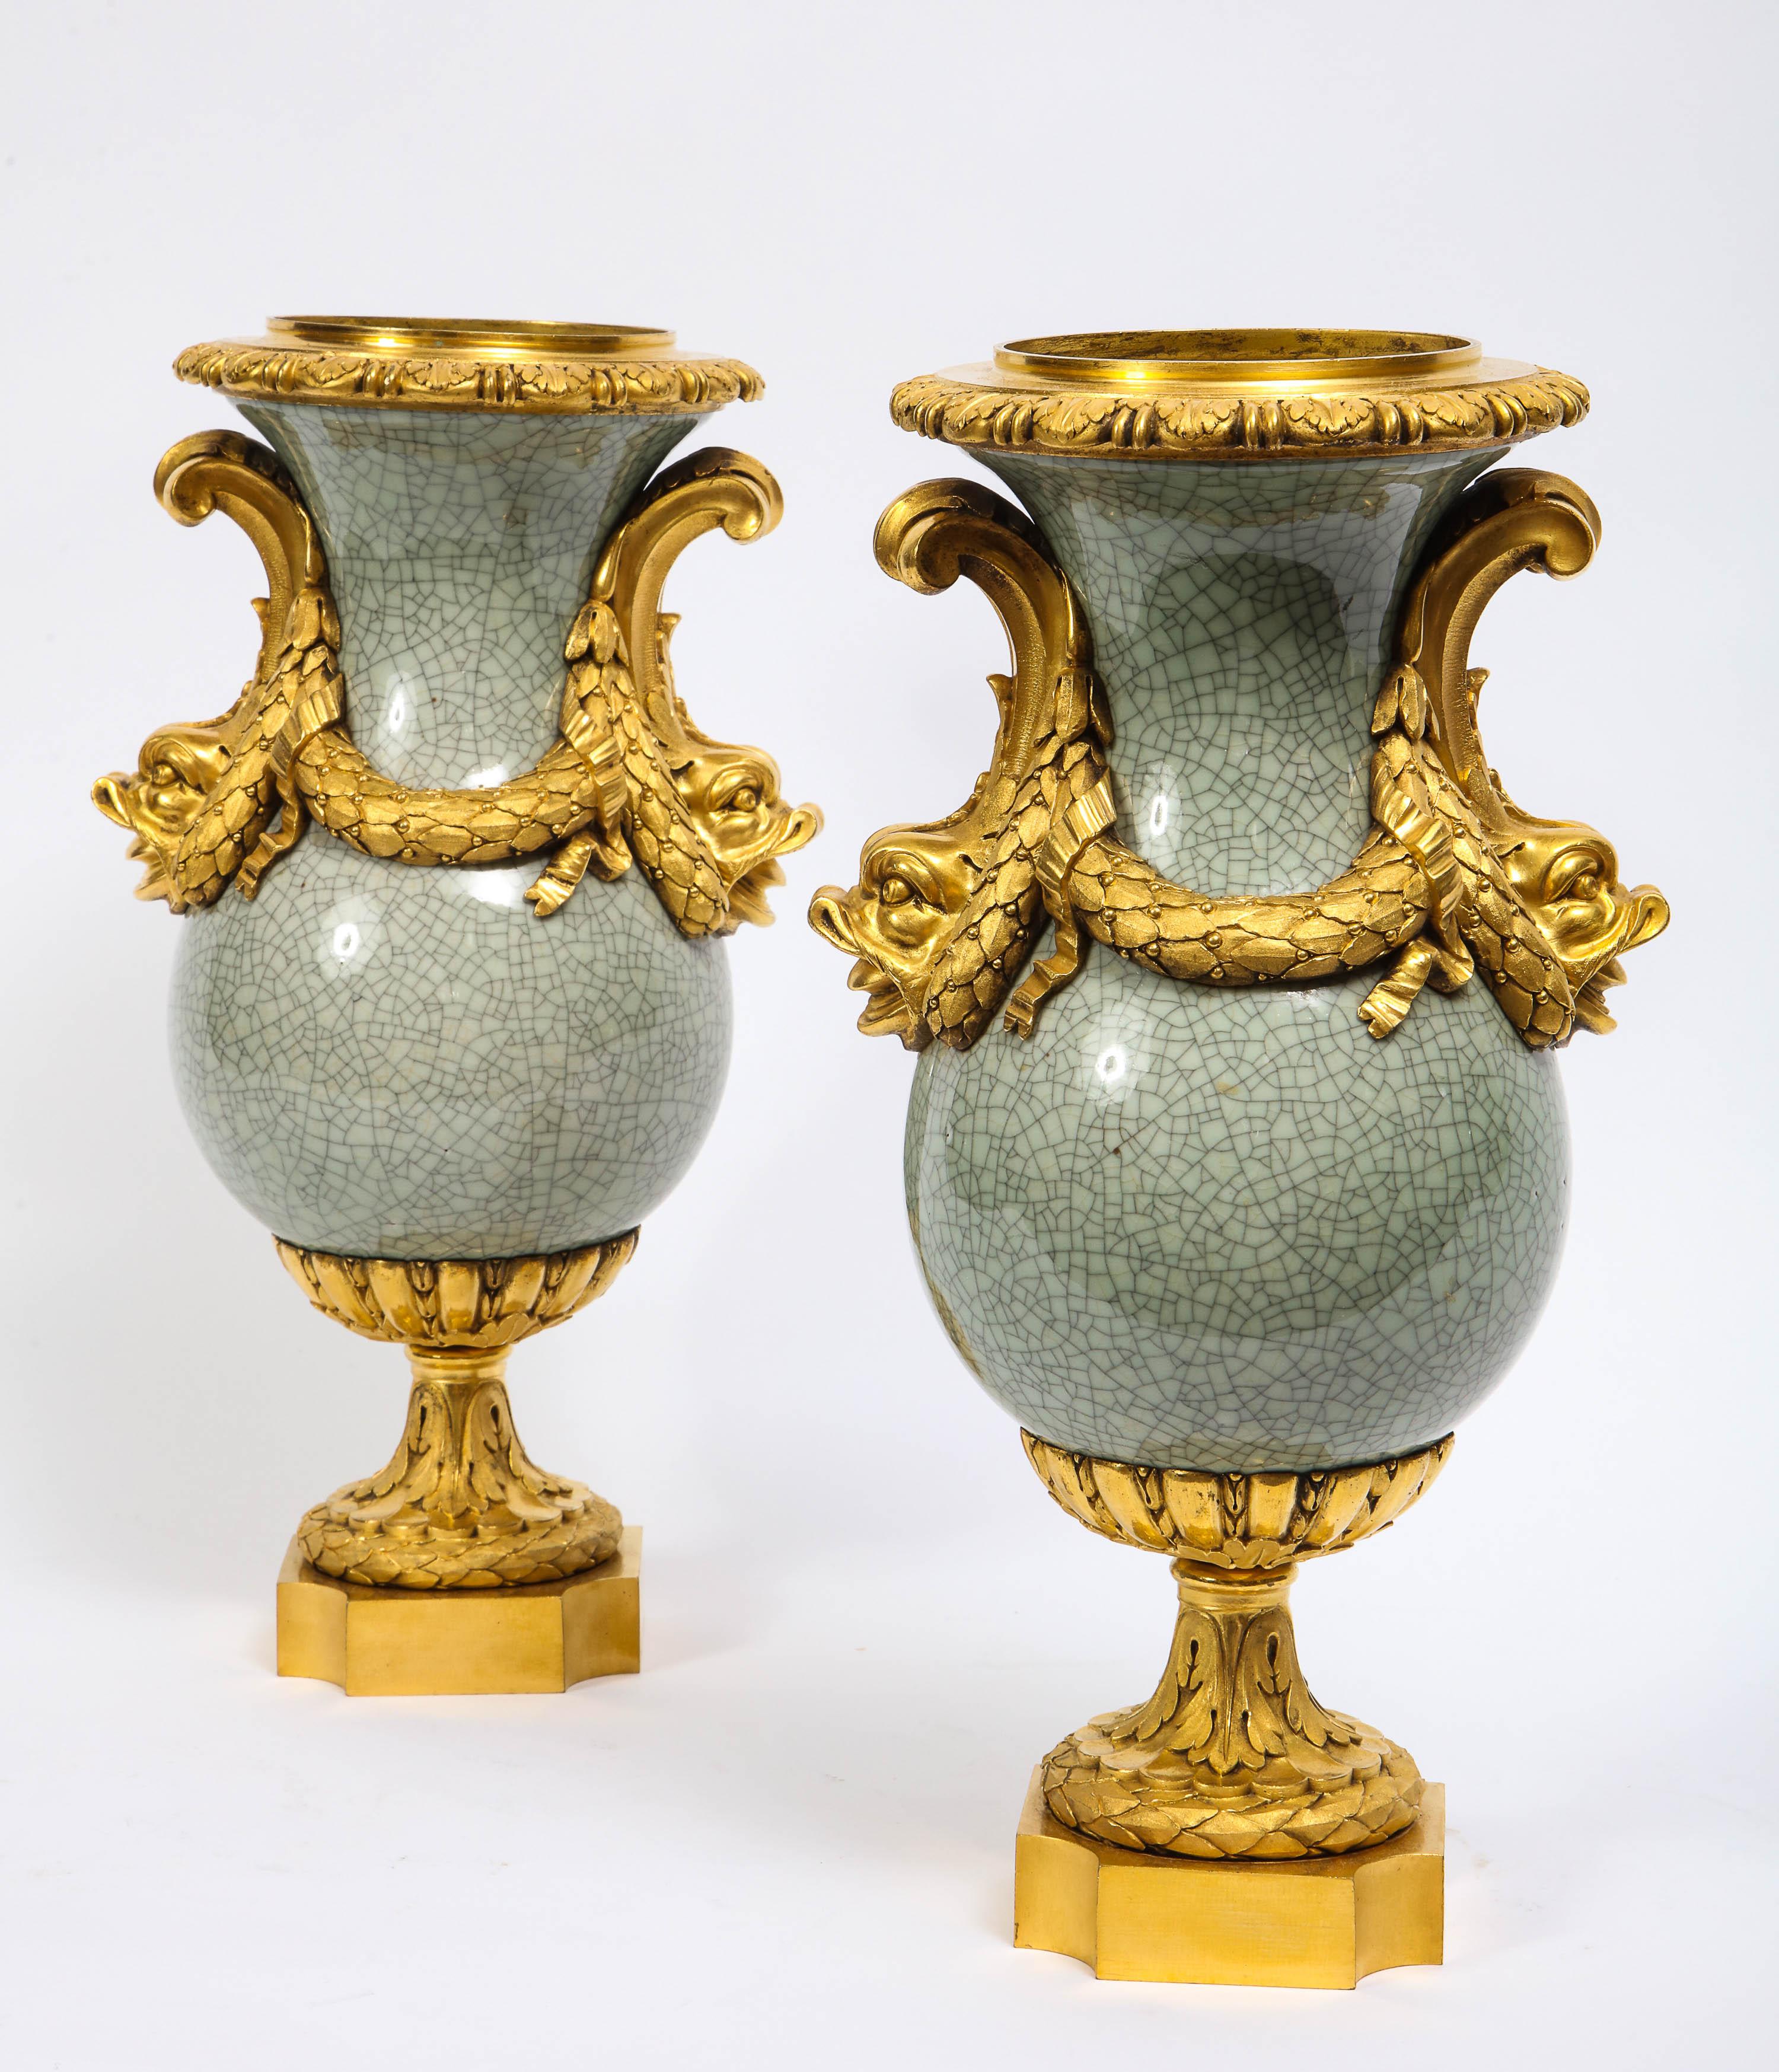 A beautiful pair of Baluster form Louis XVI style Ormolu-mounted Chinese Celadon crackle vases with dolphin handles. The porcelain was made in China between the late 1700s and early 1800s. The porcelain was then sent to France in the 19th century